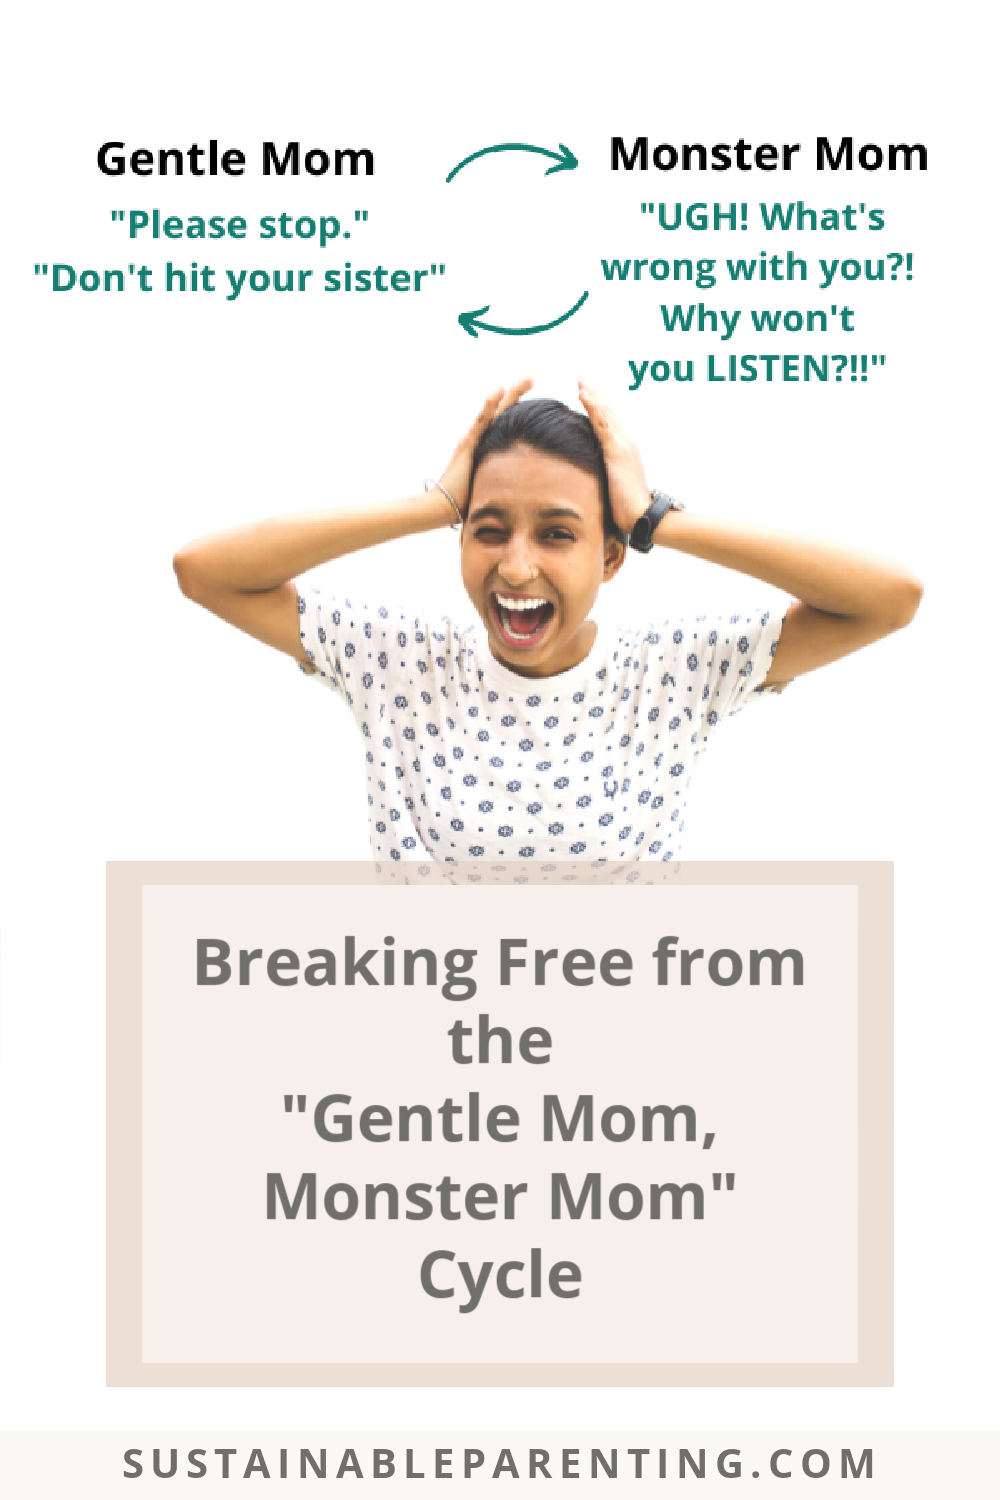 Strategies for Positive Parenting: Breaking Free from the “Gentle Mom, Monster Mom” Cycle